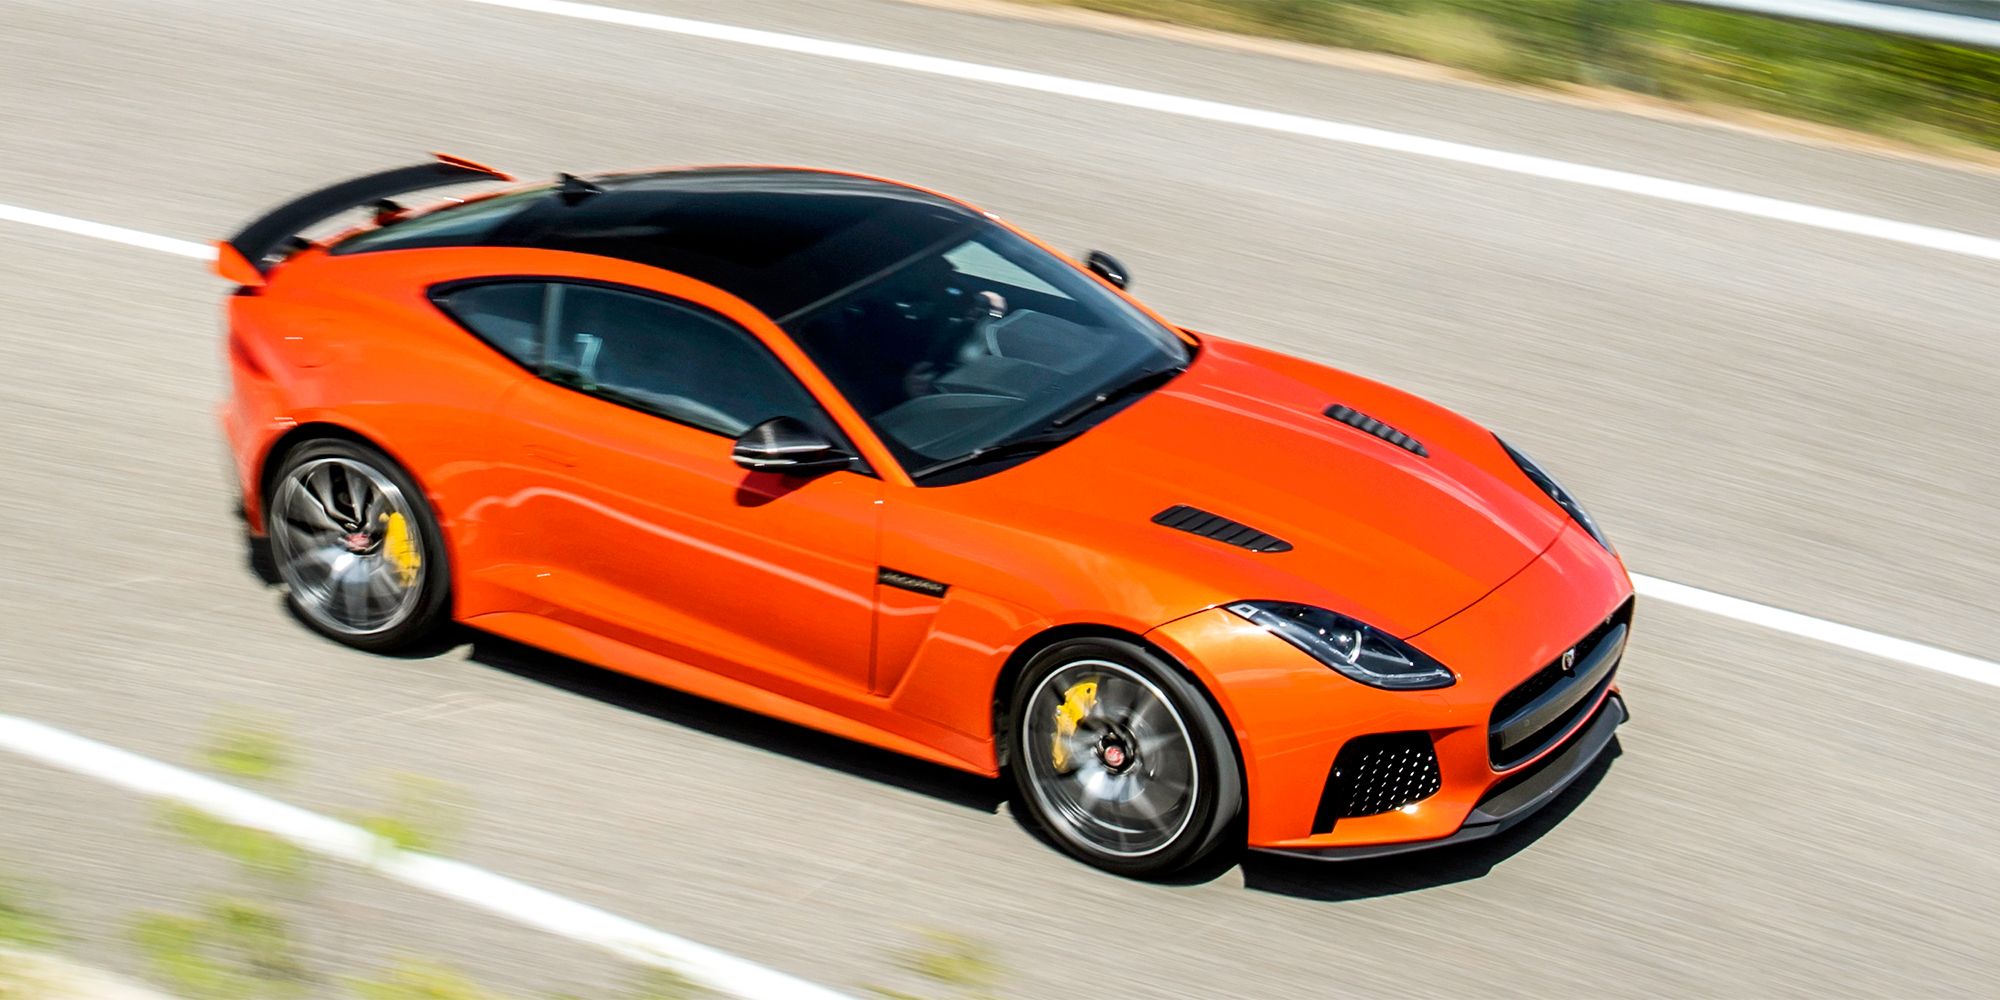 The 2017 Jaguar F Type Svr Is More Raucous And More Refined Than